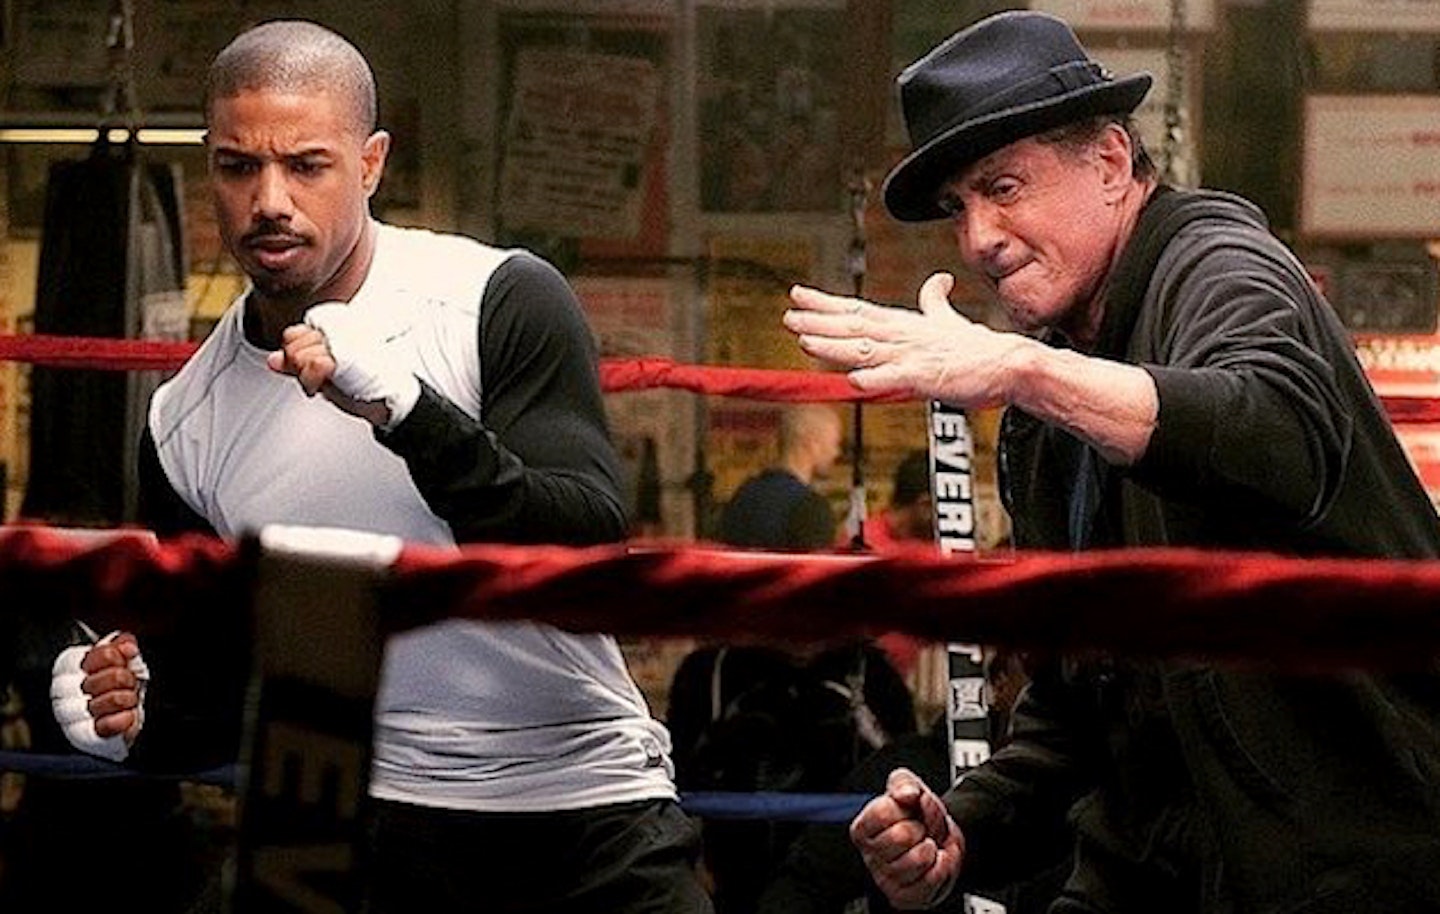 Sly-Stallone-Creed-Image